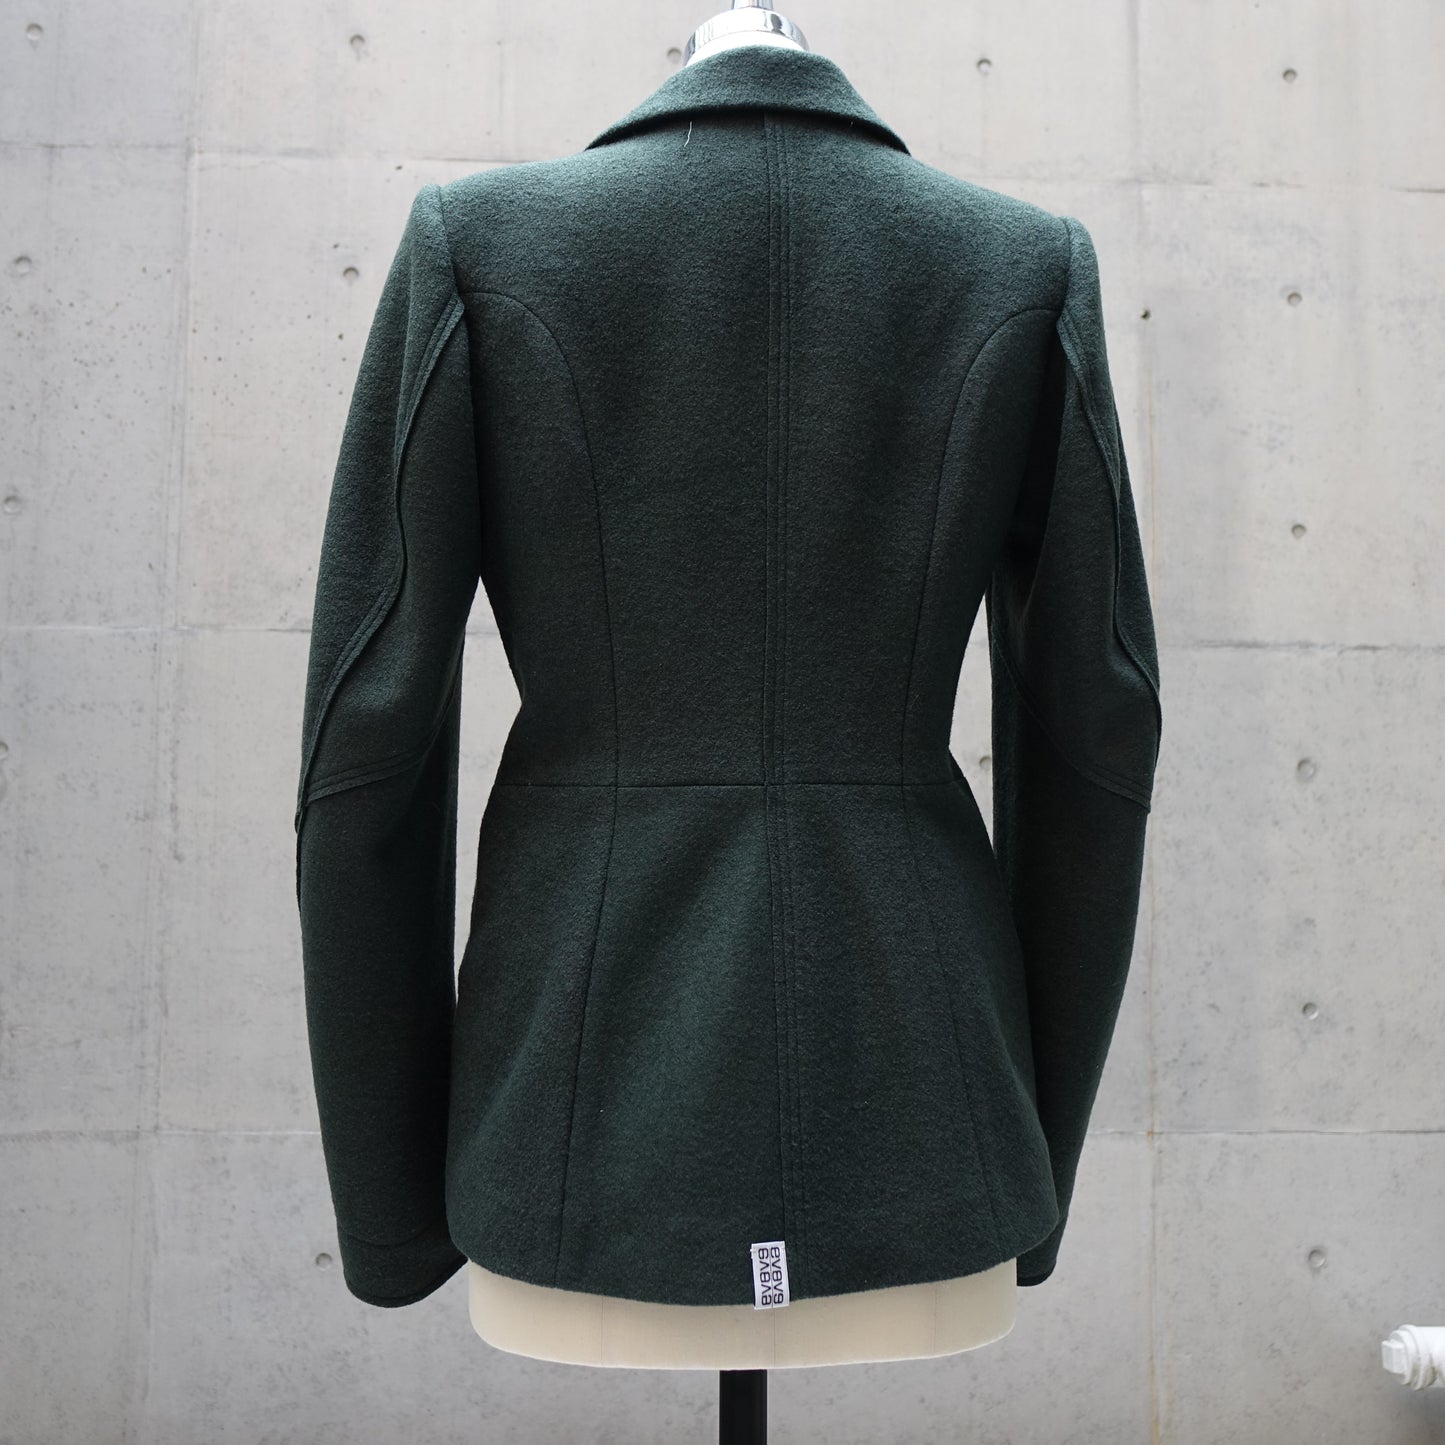 Hiroco’s Iconic Signature Jacket in Forest Green